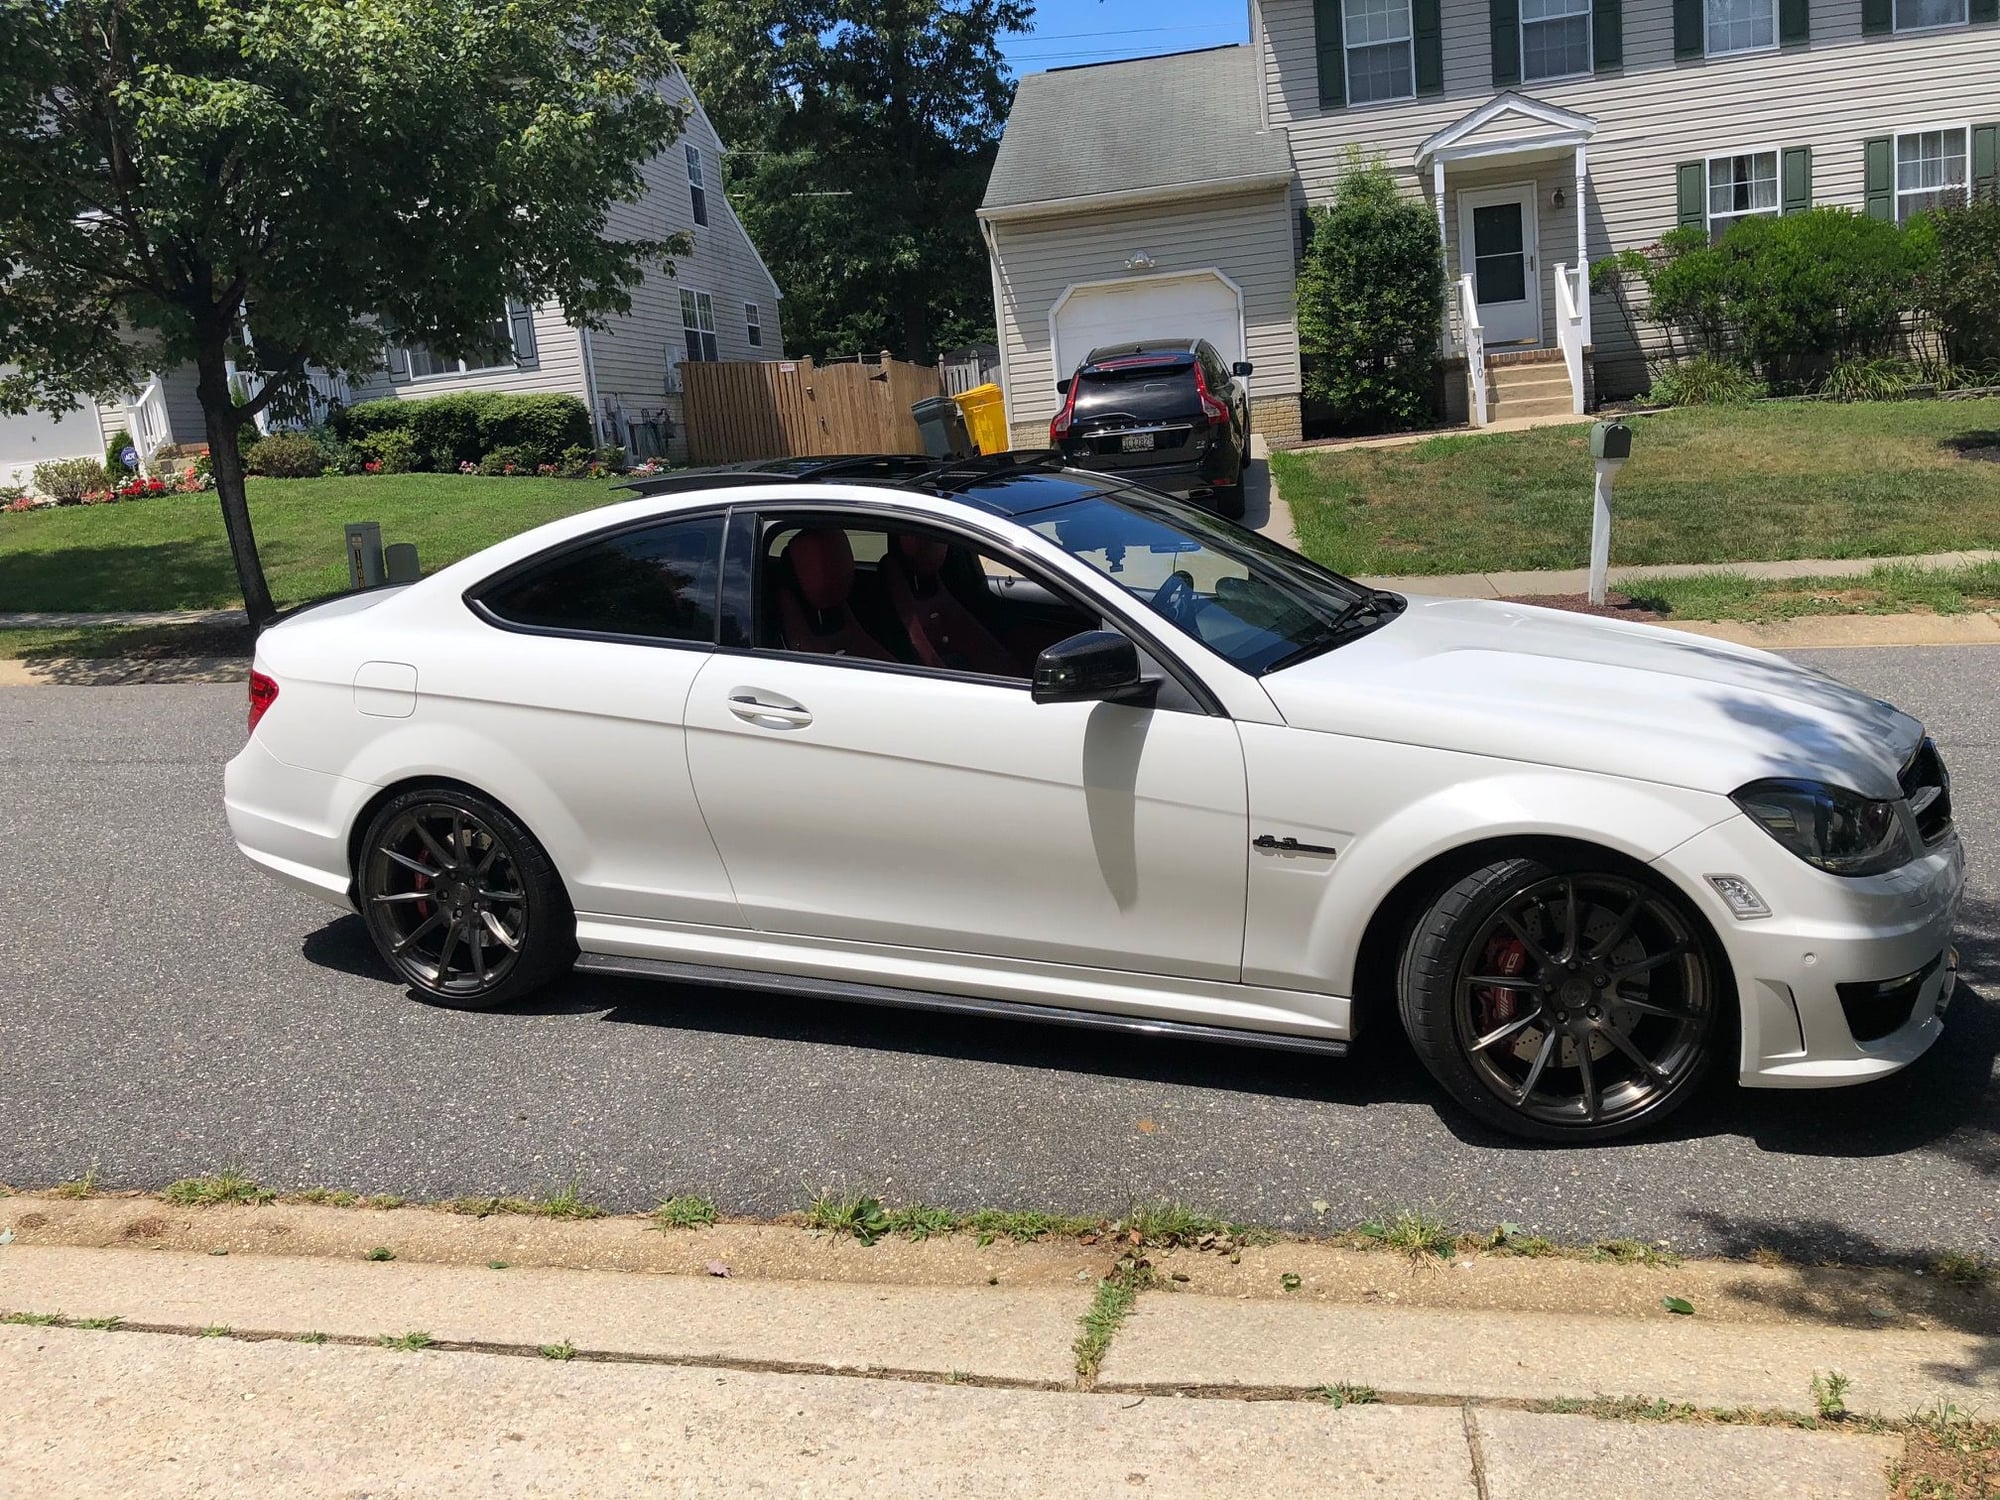 Wheels and Tires/Axles - Signature Forged SV103 rims and tires for sale! - Used - 2009 to 2015 Mercedes-Benz C63 AMG - Annapolis, MD 21401, United States